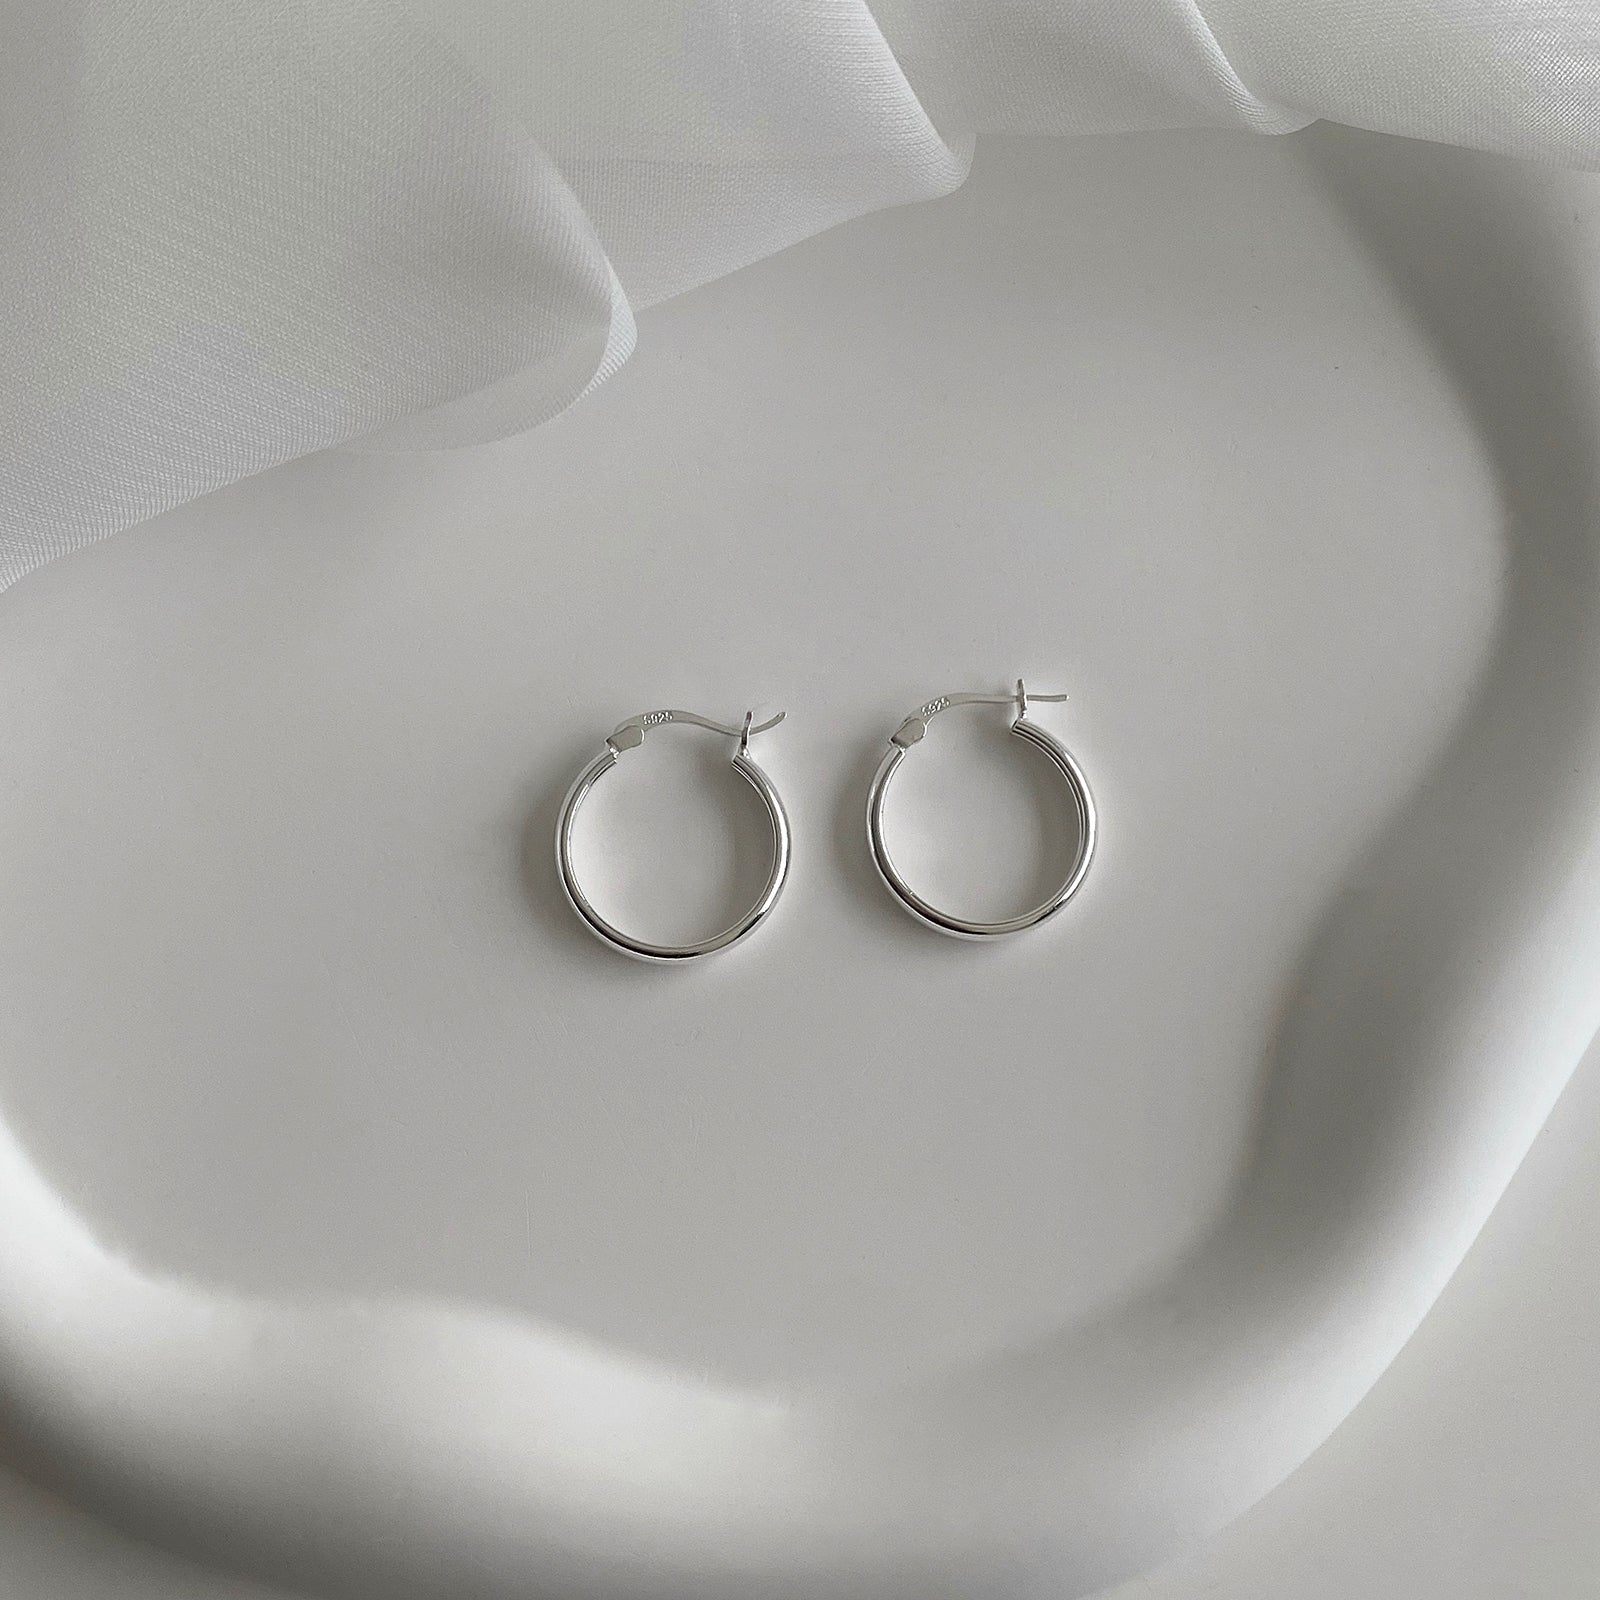 Top view of Jane Hoops 20mm are classic hoop earrings with a latch back for closure. It's made of 925 sterling silver with a shiny smooth finish. Perfect hoop earrings for everyday. Has a S925 stamp on the latch.